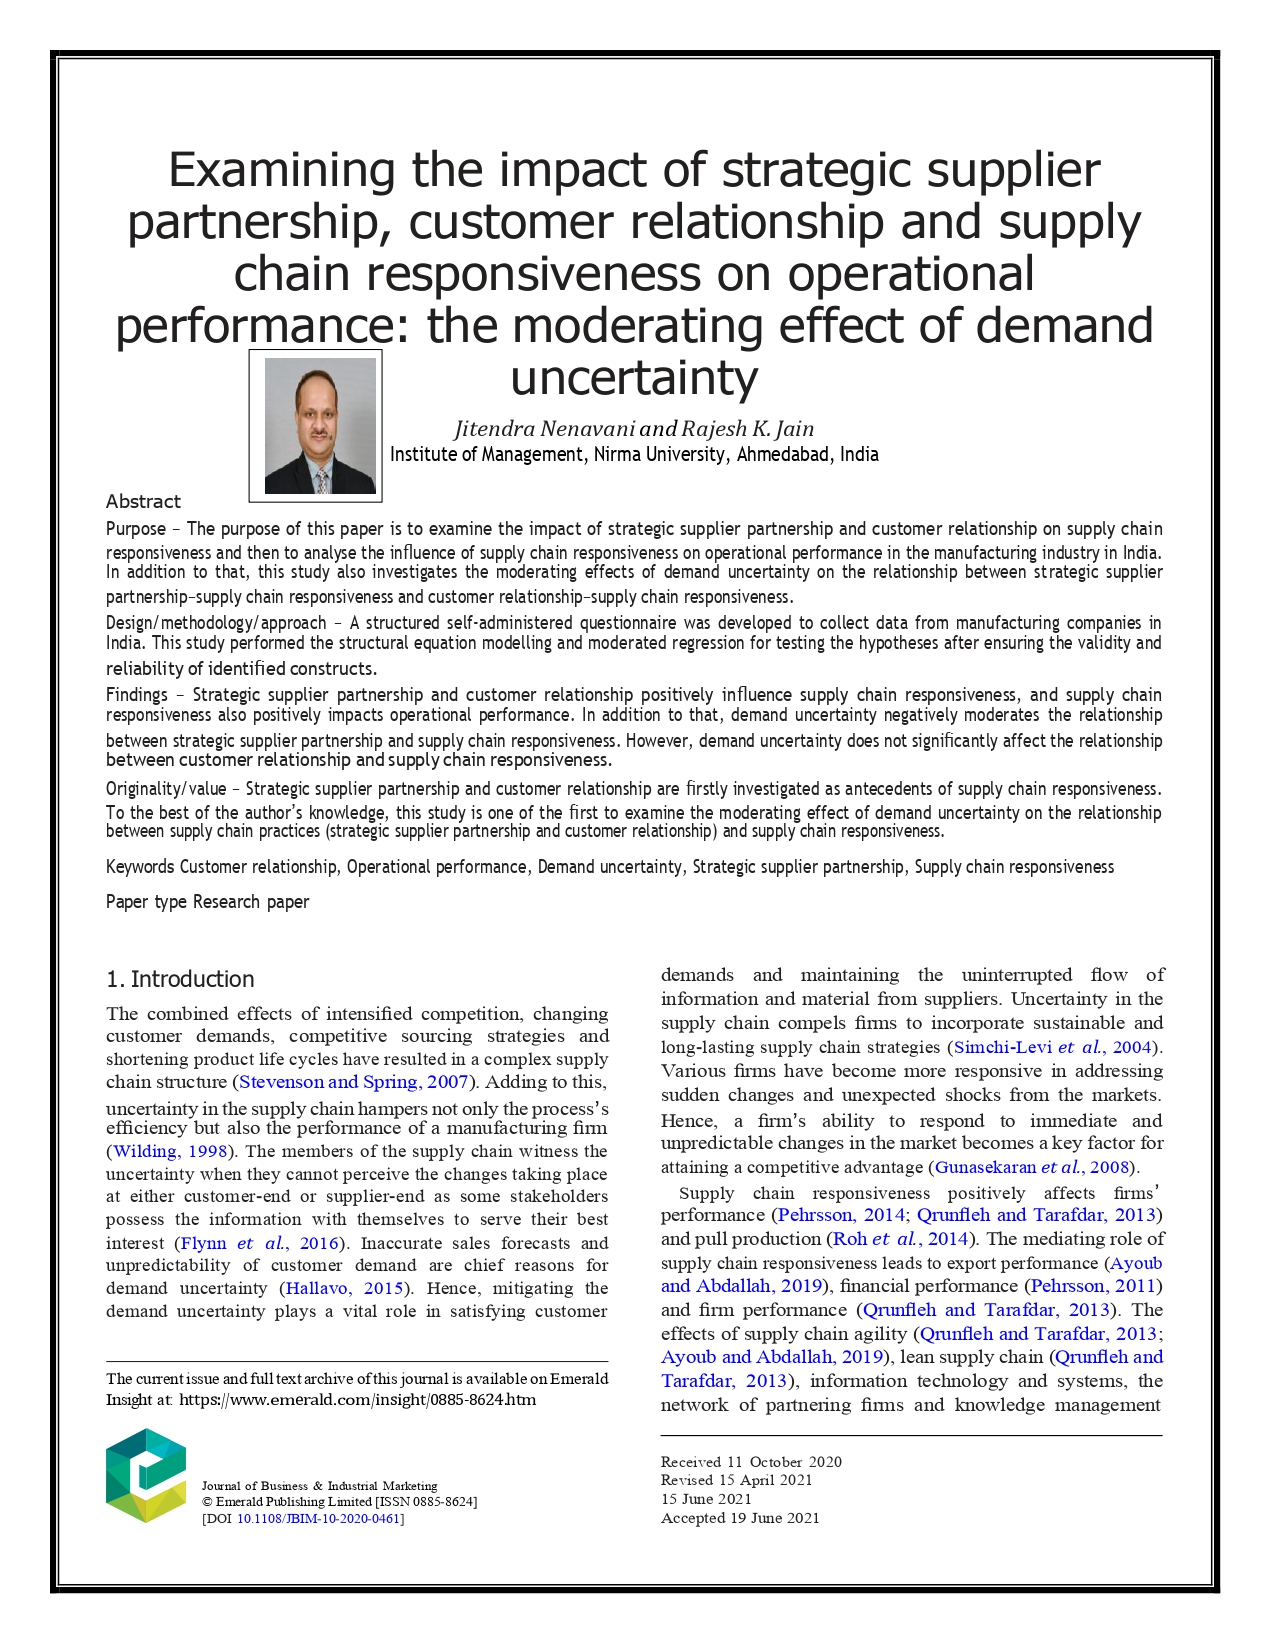 Examining the impact of strategic supplier partnership, customer relationship and supply chain responsiveness on operational performance: the moderating effect of demand uncertainty